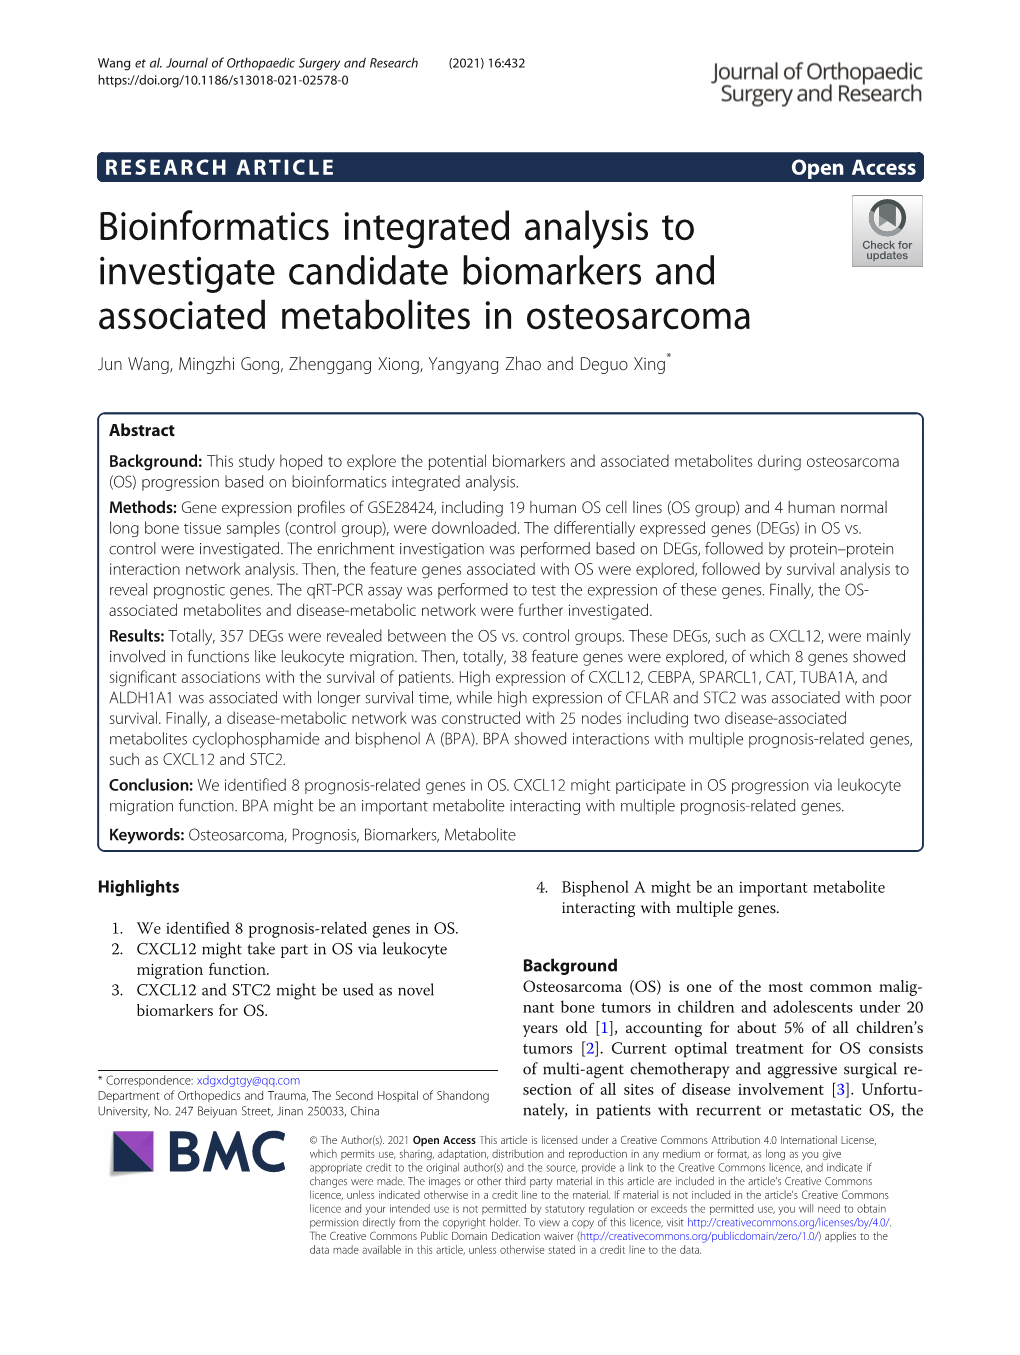 Bioinformatics Integrated Analysis to Investigate Candidate Biomarkers and Associated Metabolites in Osteosarcoma